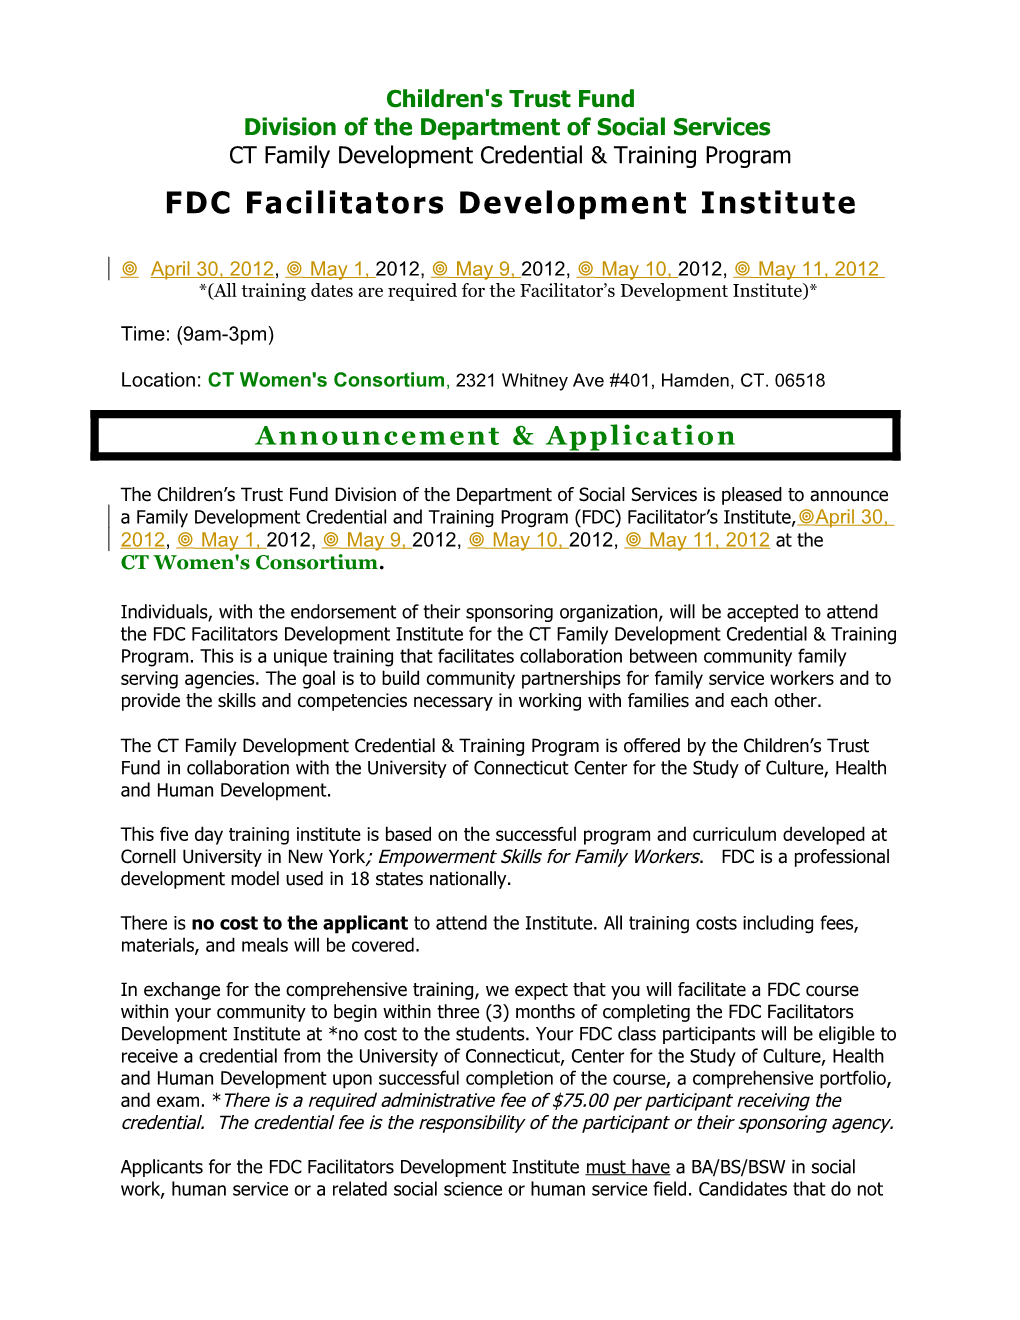 CT Family Development Credential and Training Program